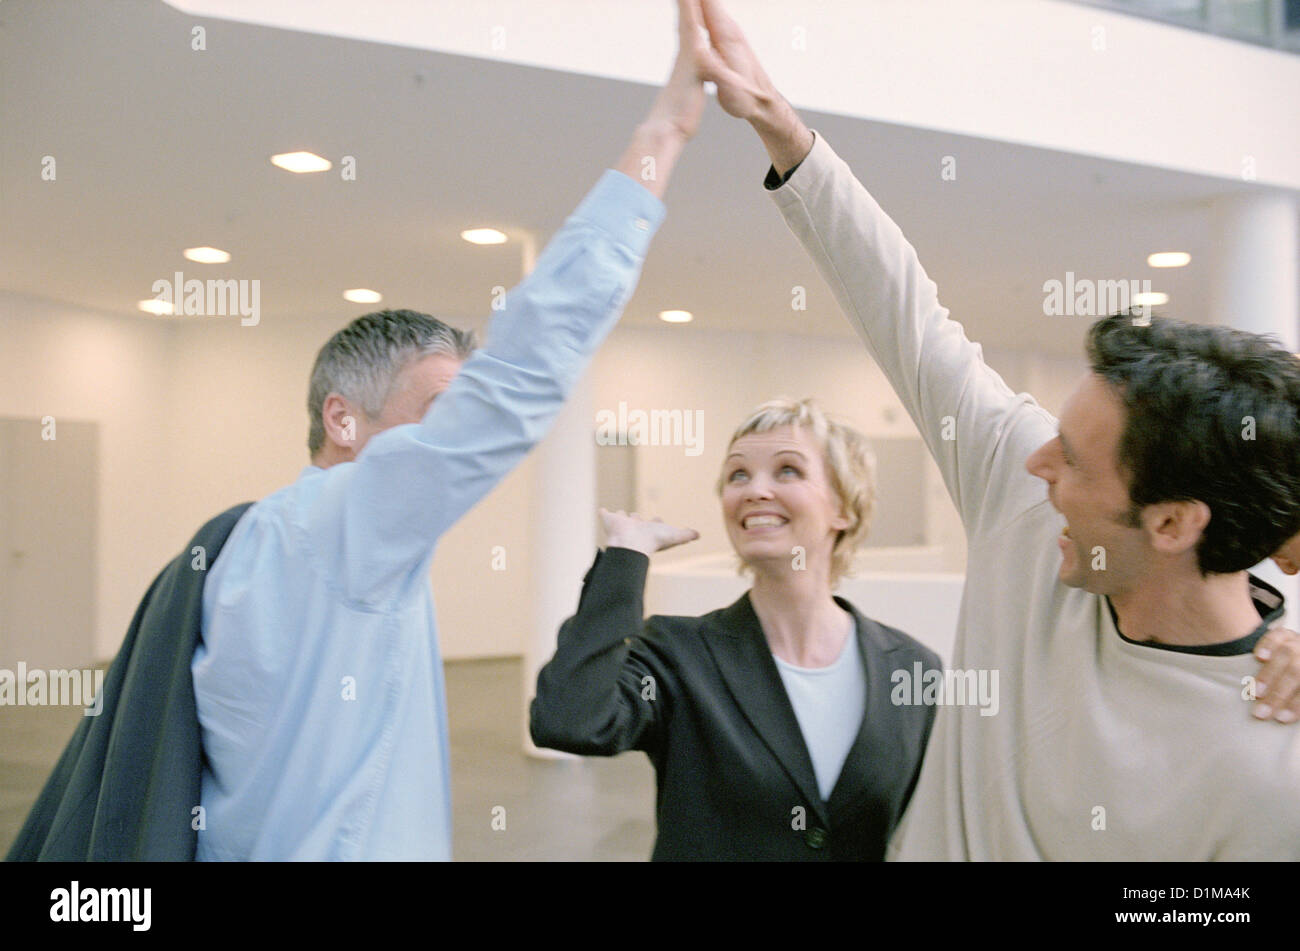 Three business people to give so a high five License free except ads and billboards Stock Photo